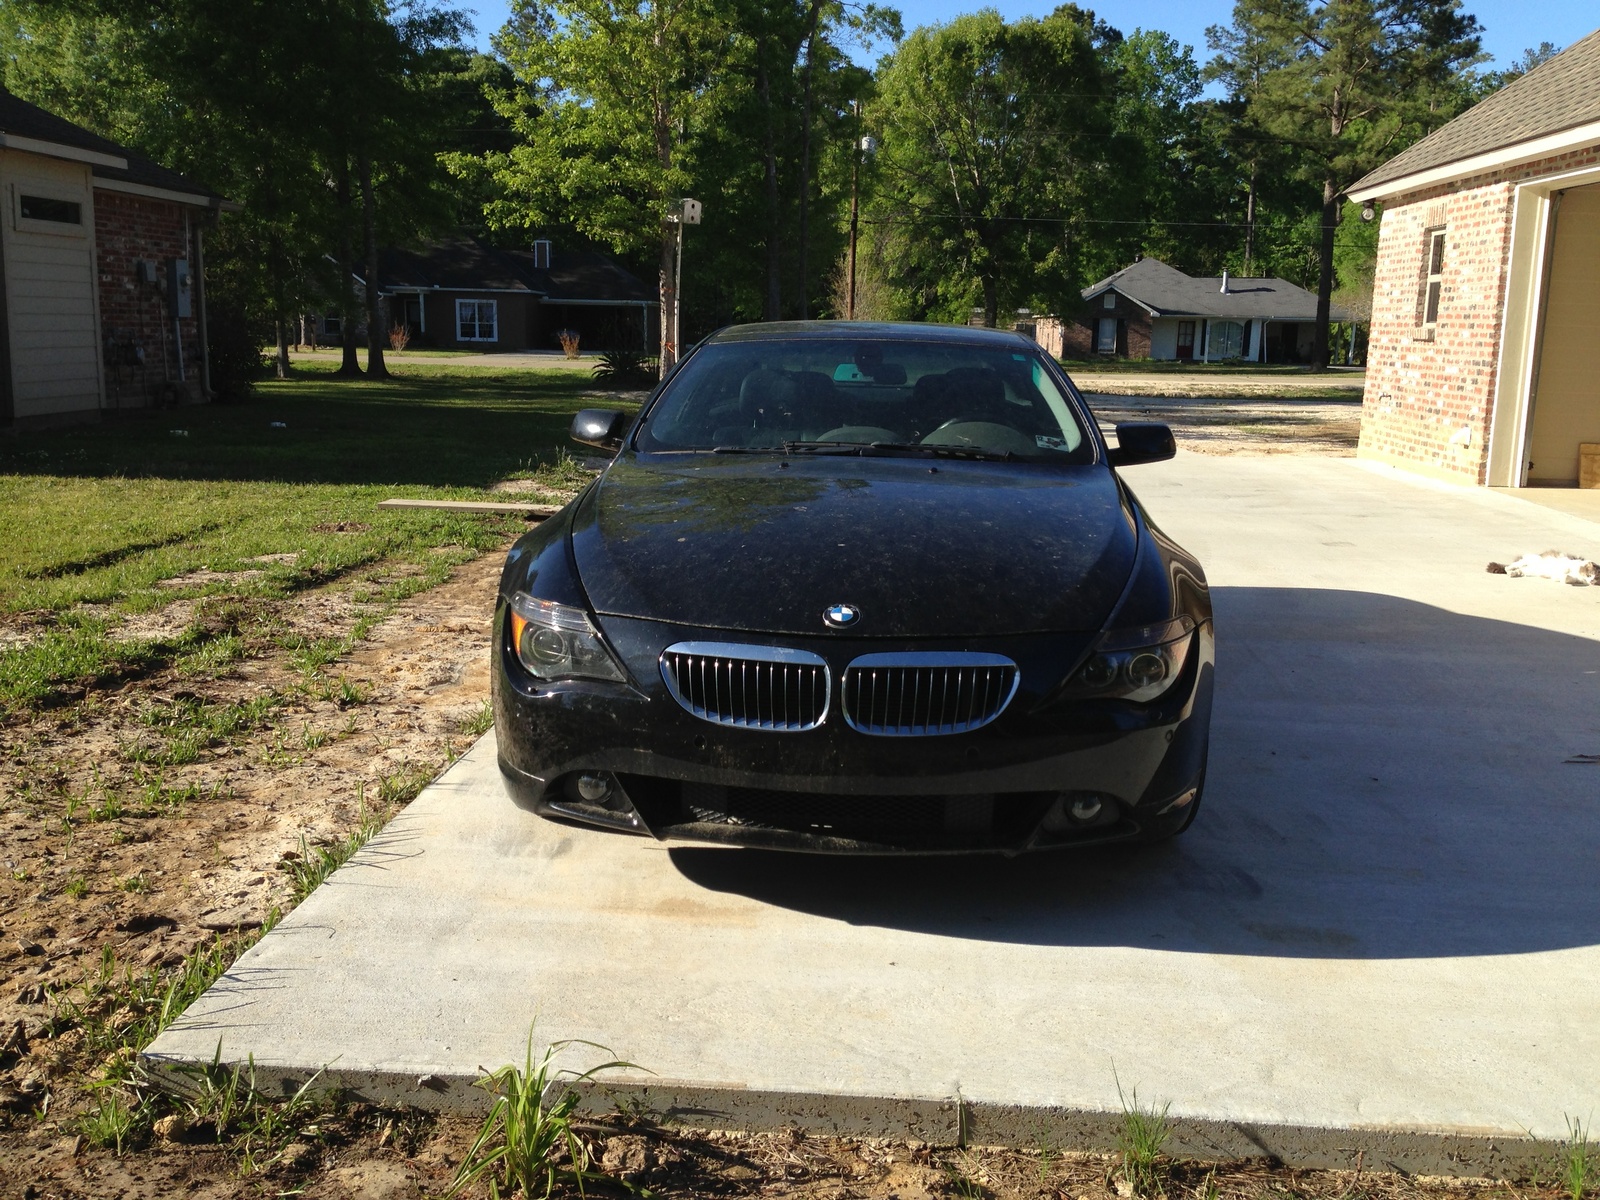 Used bmw for sale new orleans #4